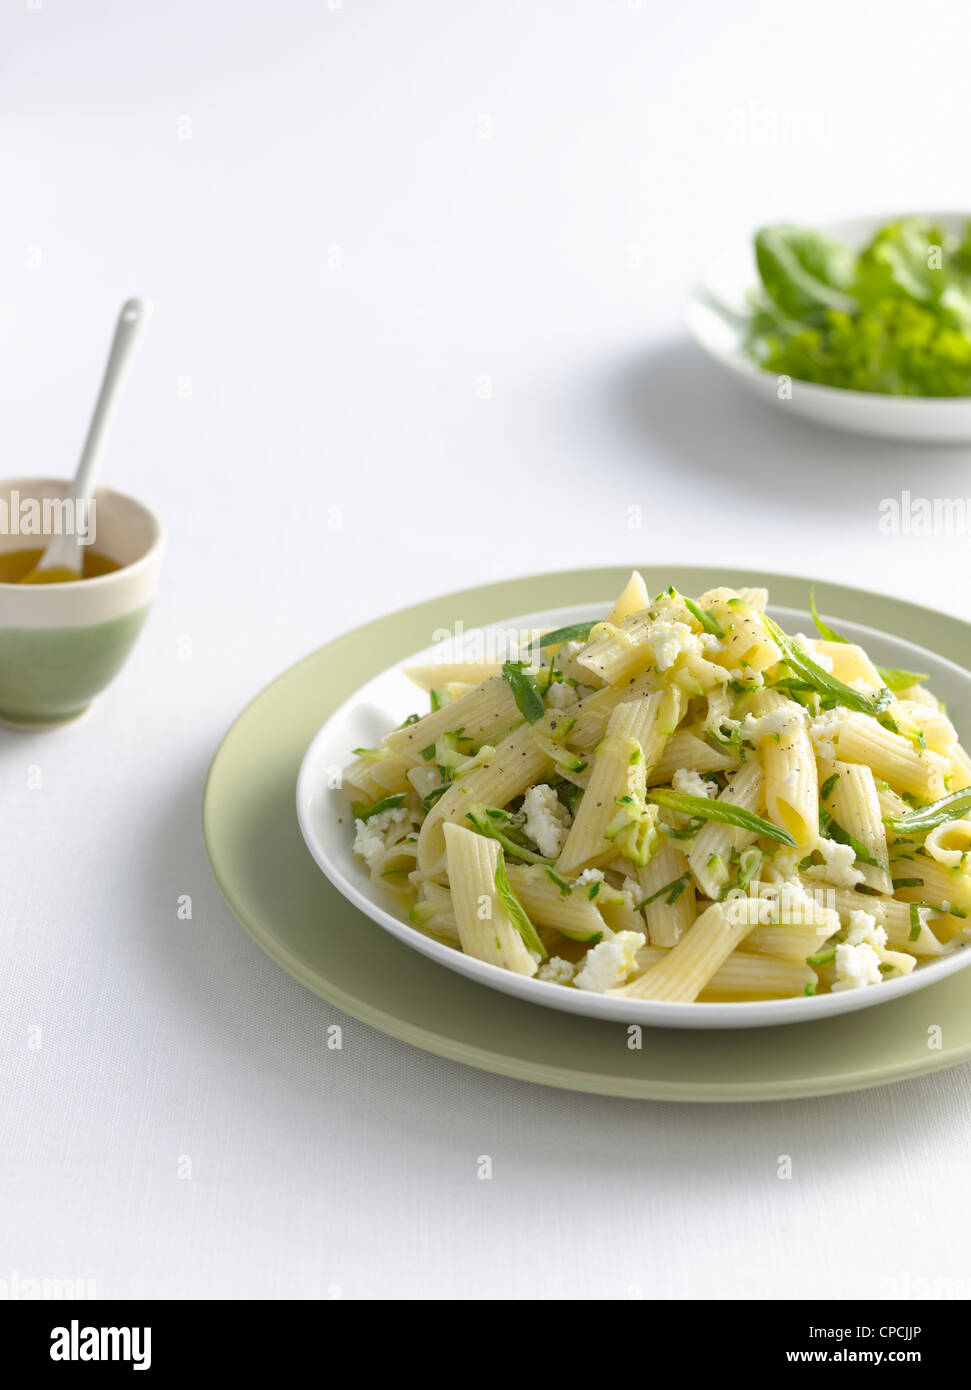 Bowl of pasta with cheese and herbs Stock Photo